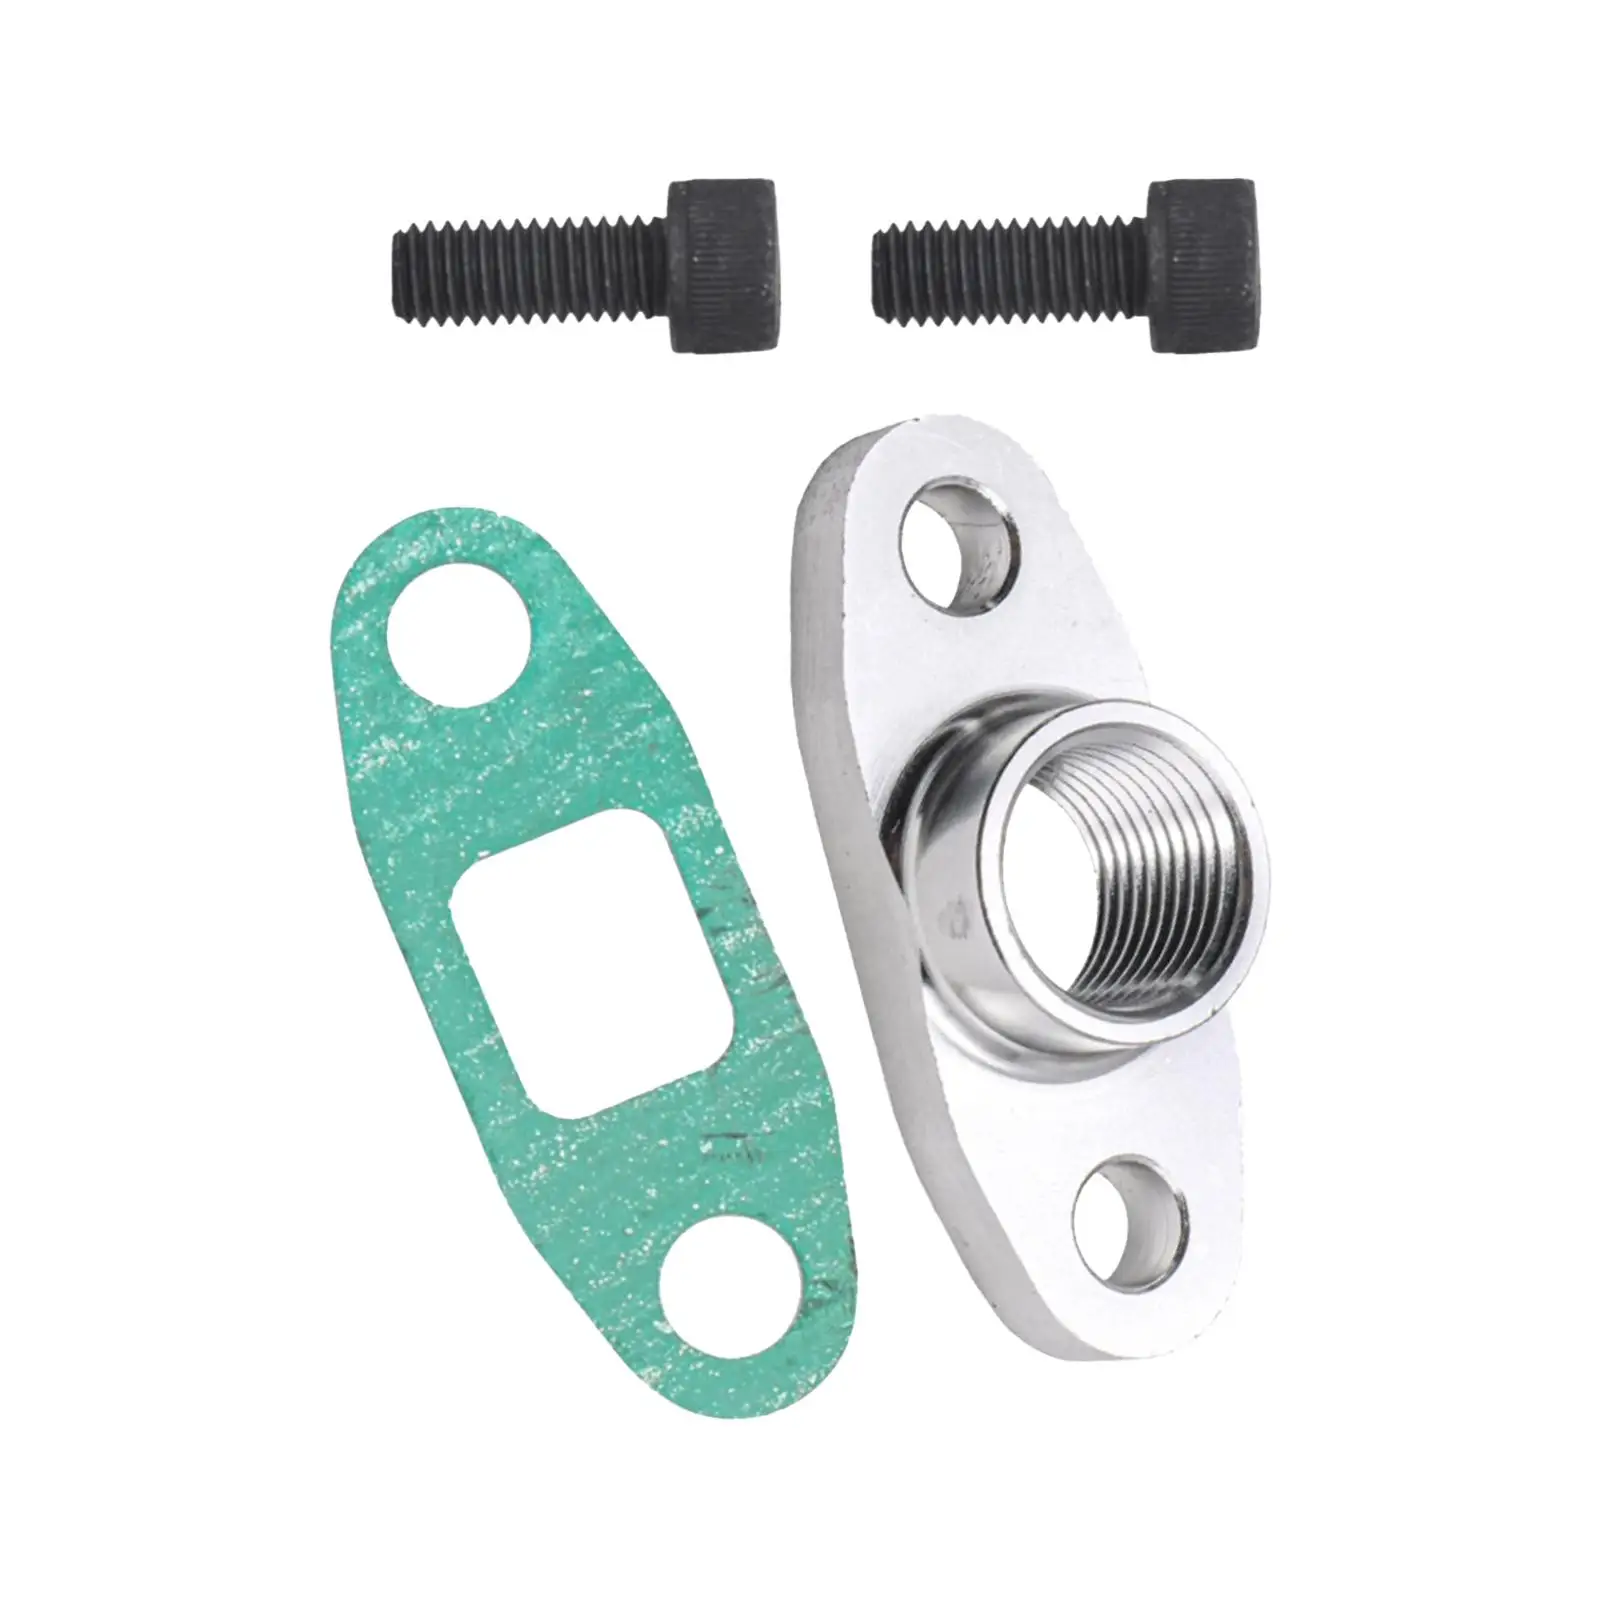 Oil feed Inlet Flange Gasket Fitting Set AN10 Fitting Durable Car Accessories Aluminum Alloy 1/2